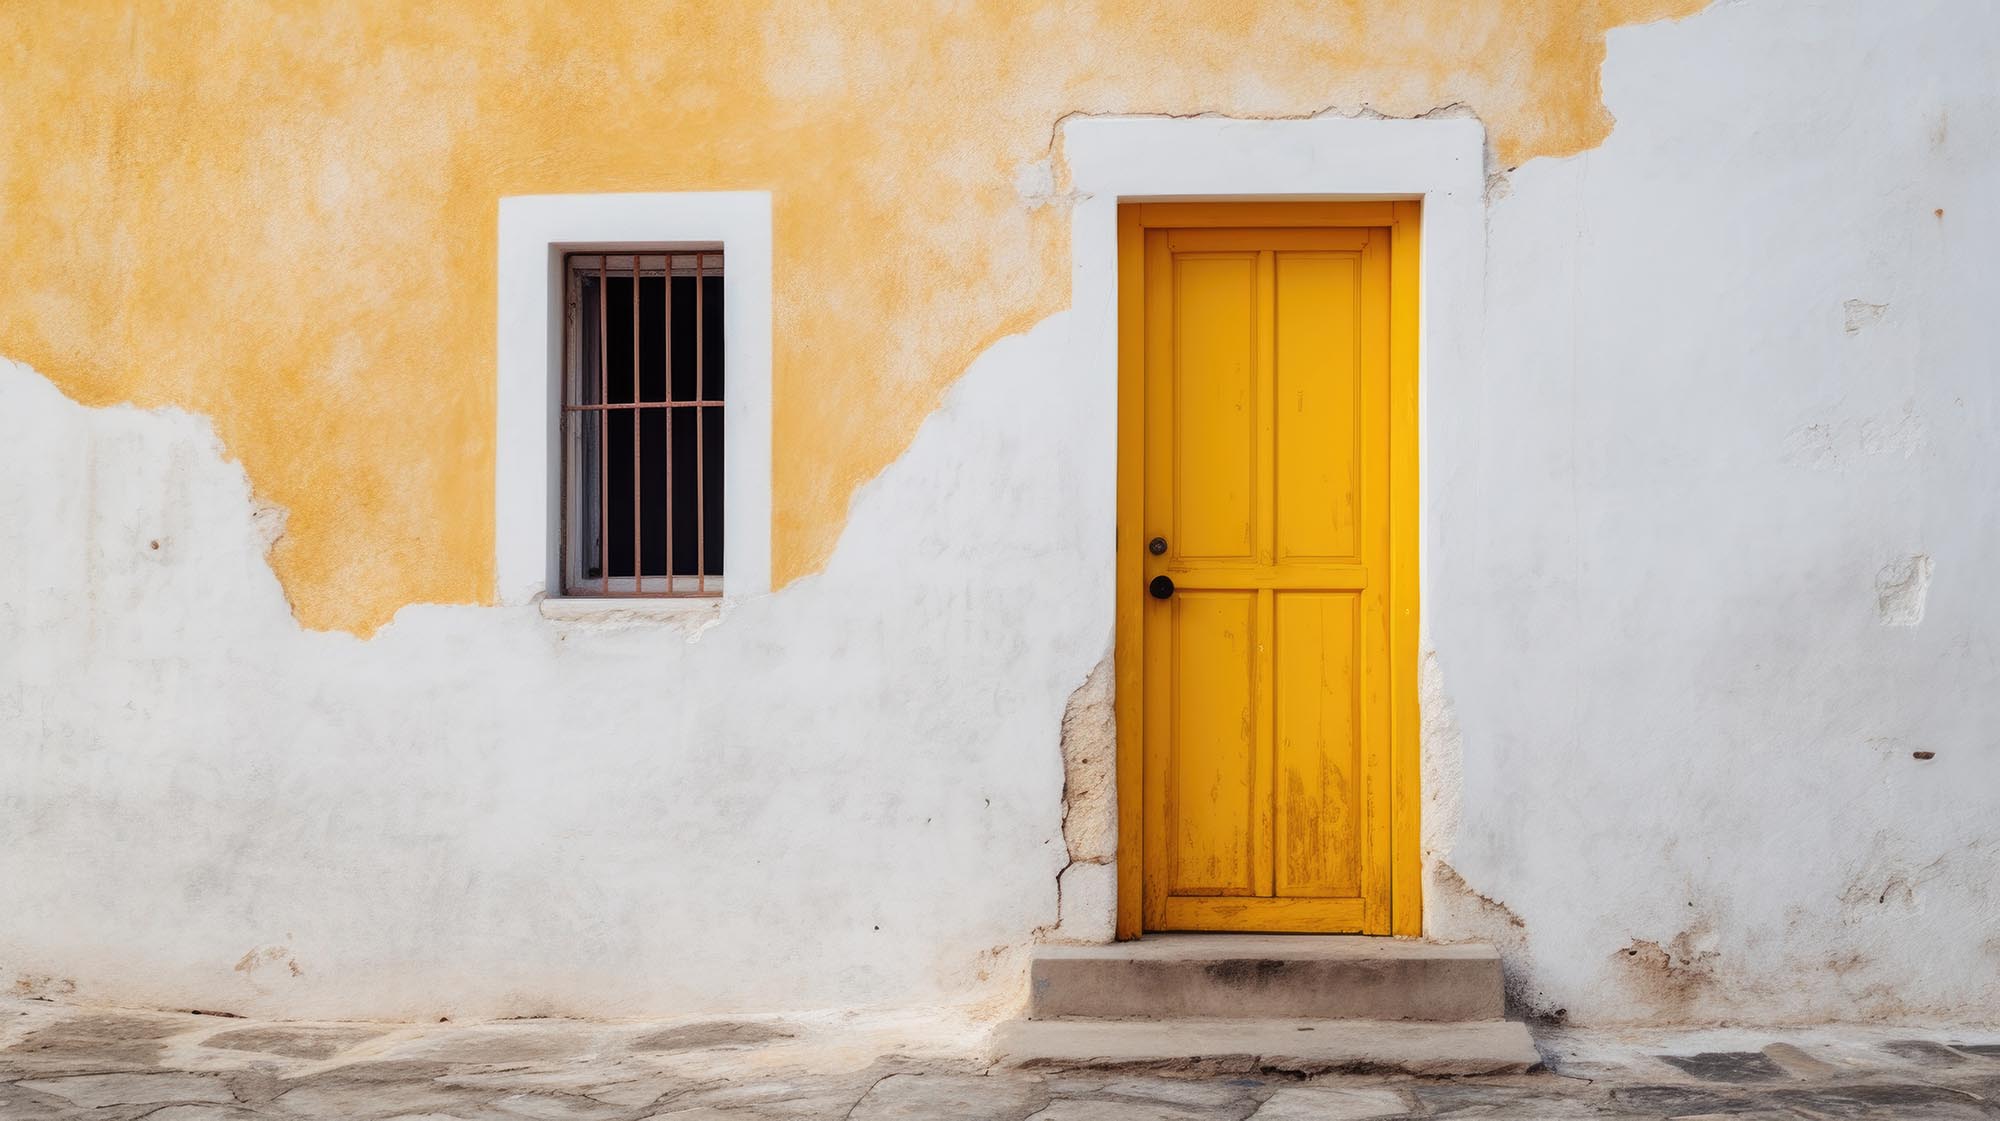 A white wall with a yellow door and window.